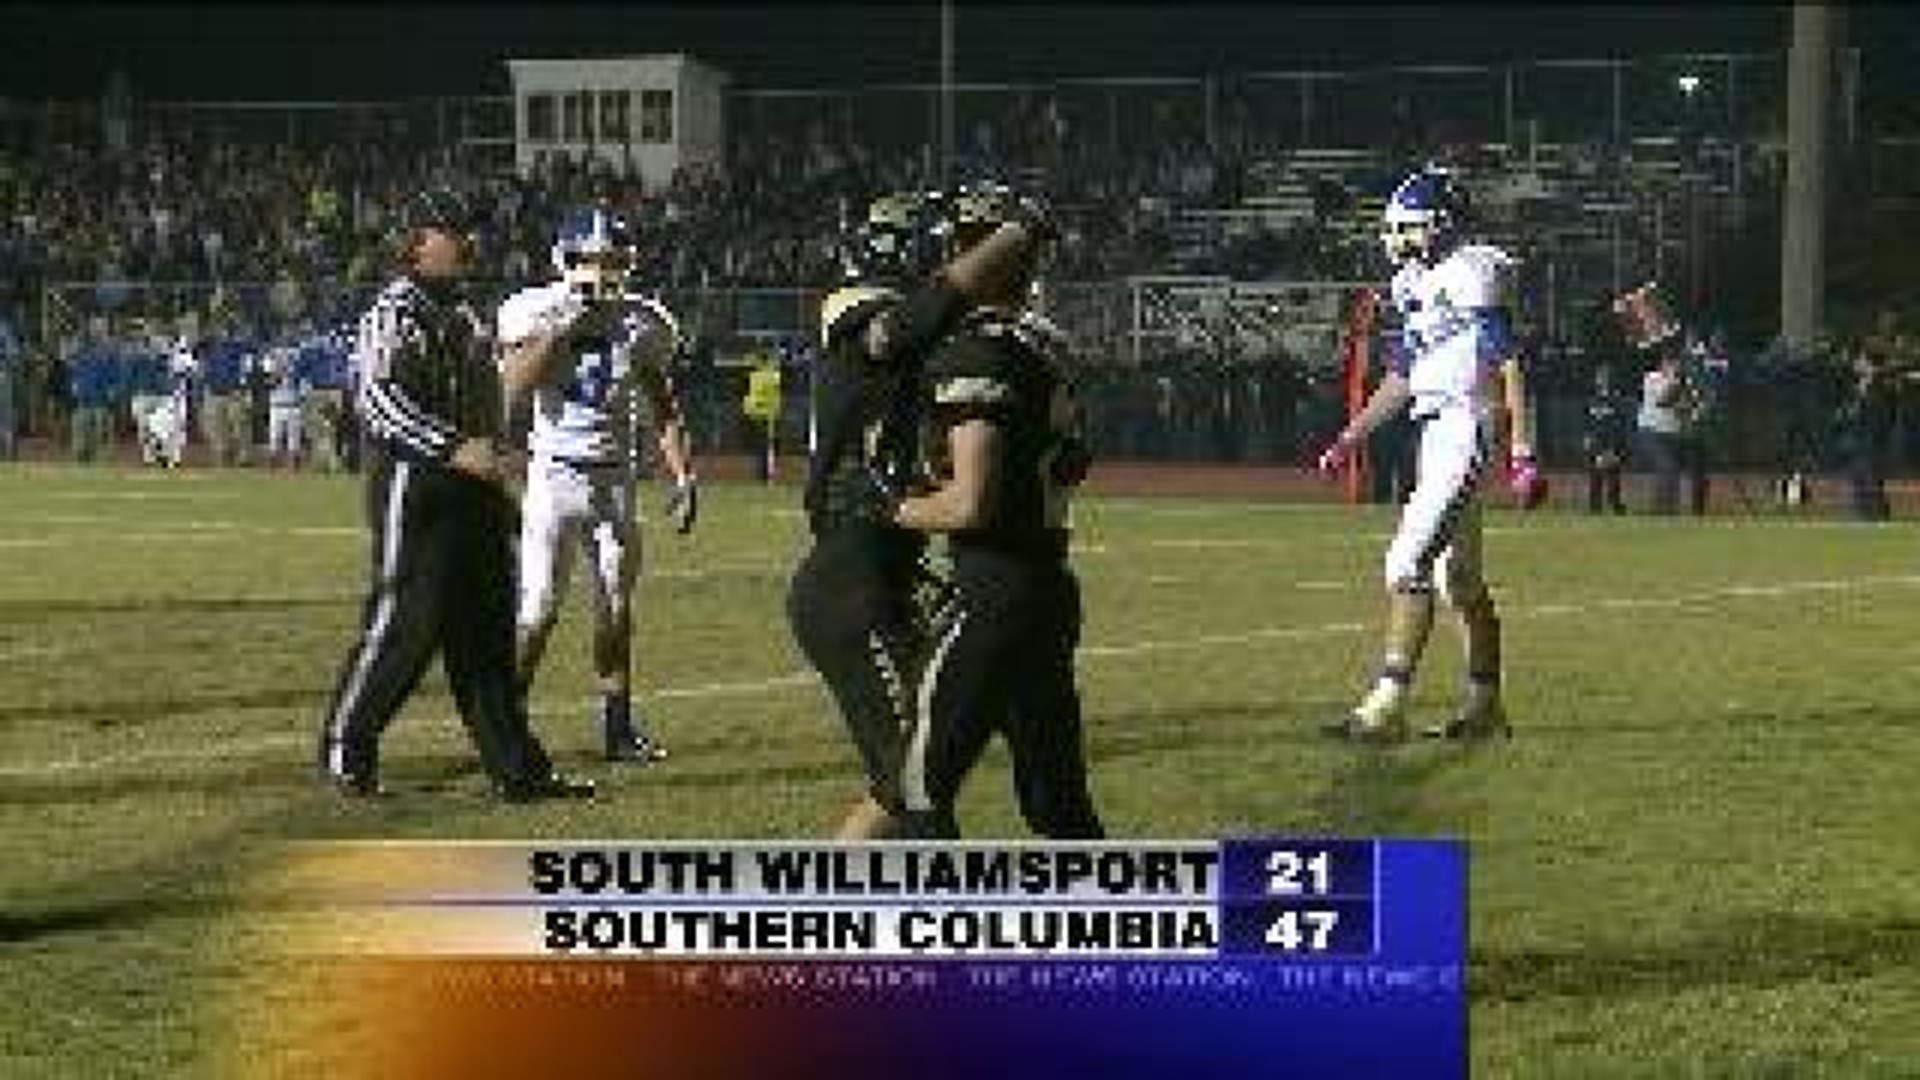 South Wmpt vs Southern Columbia